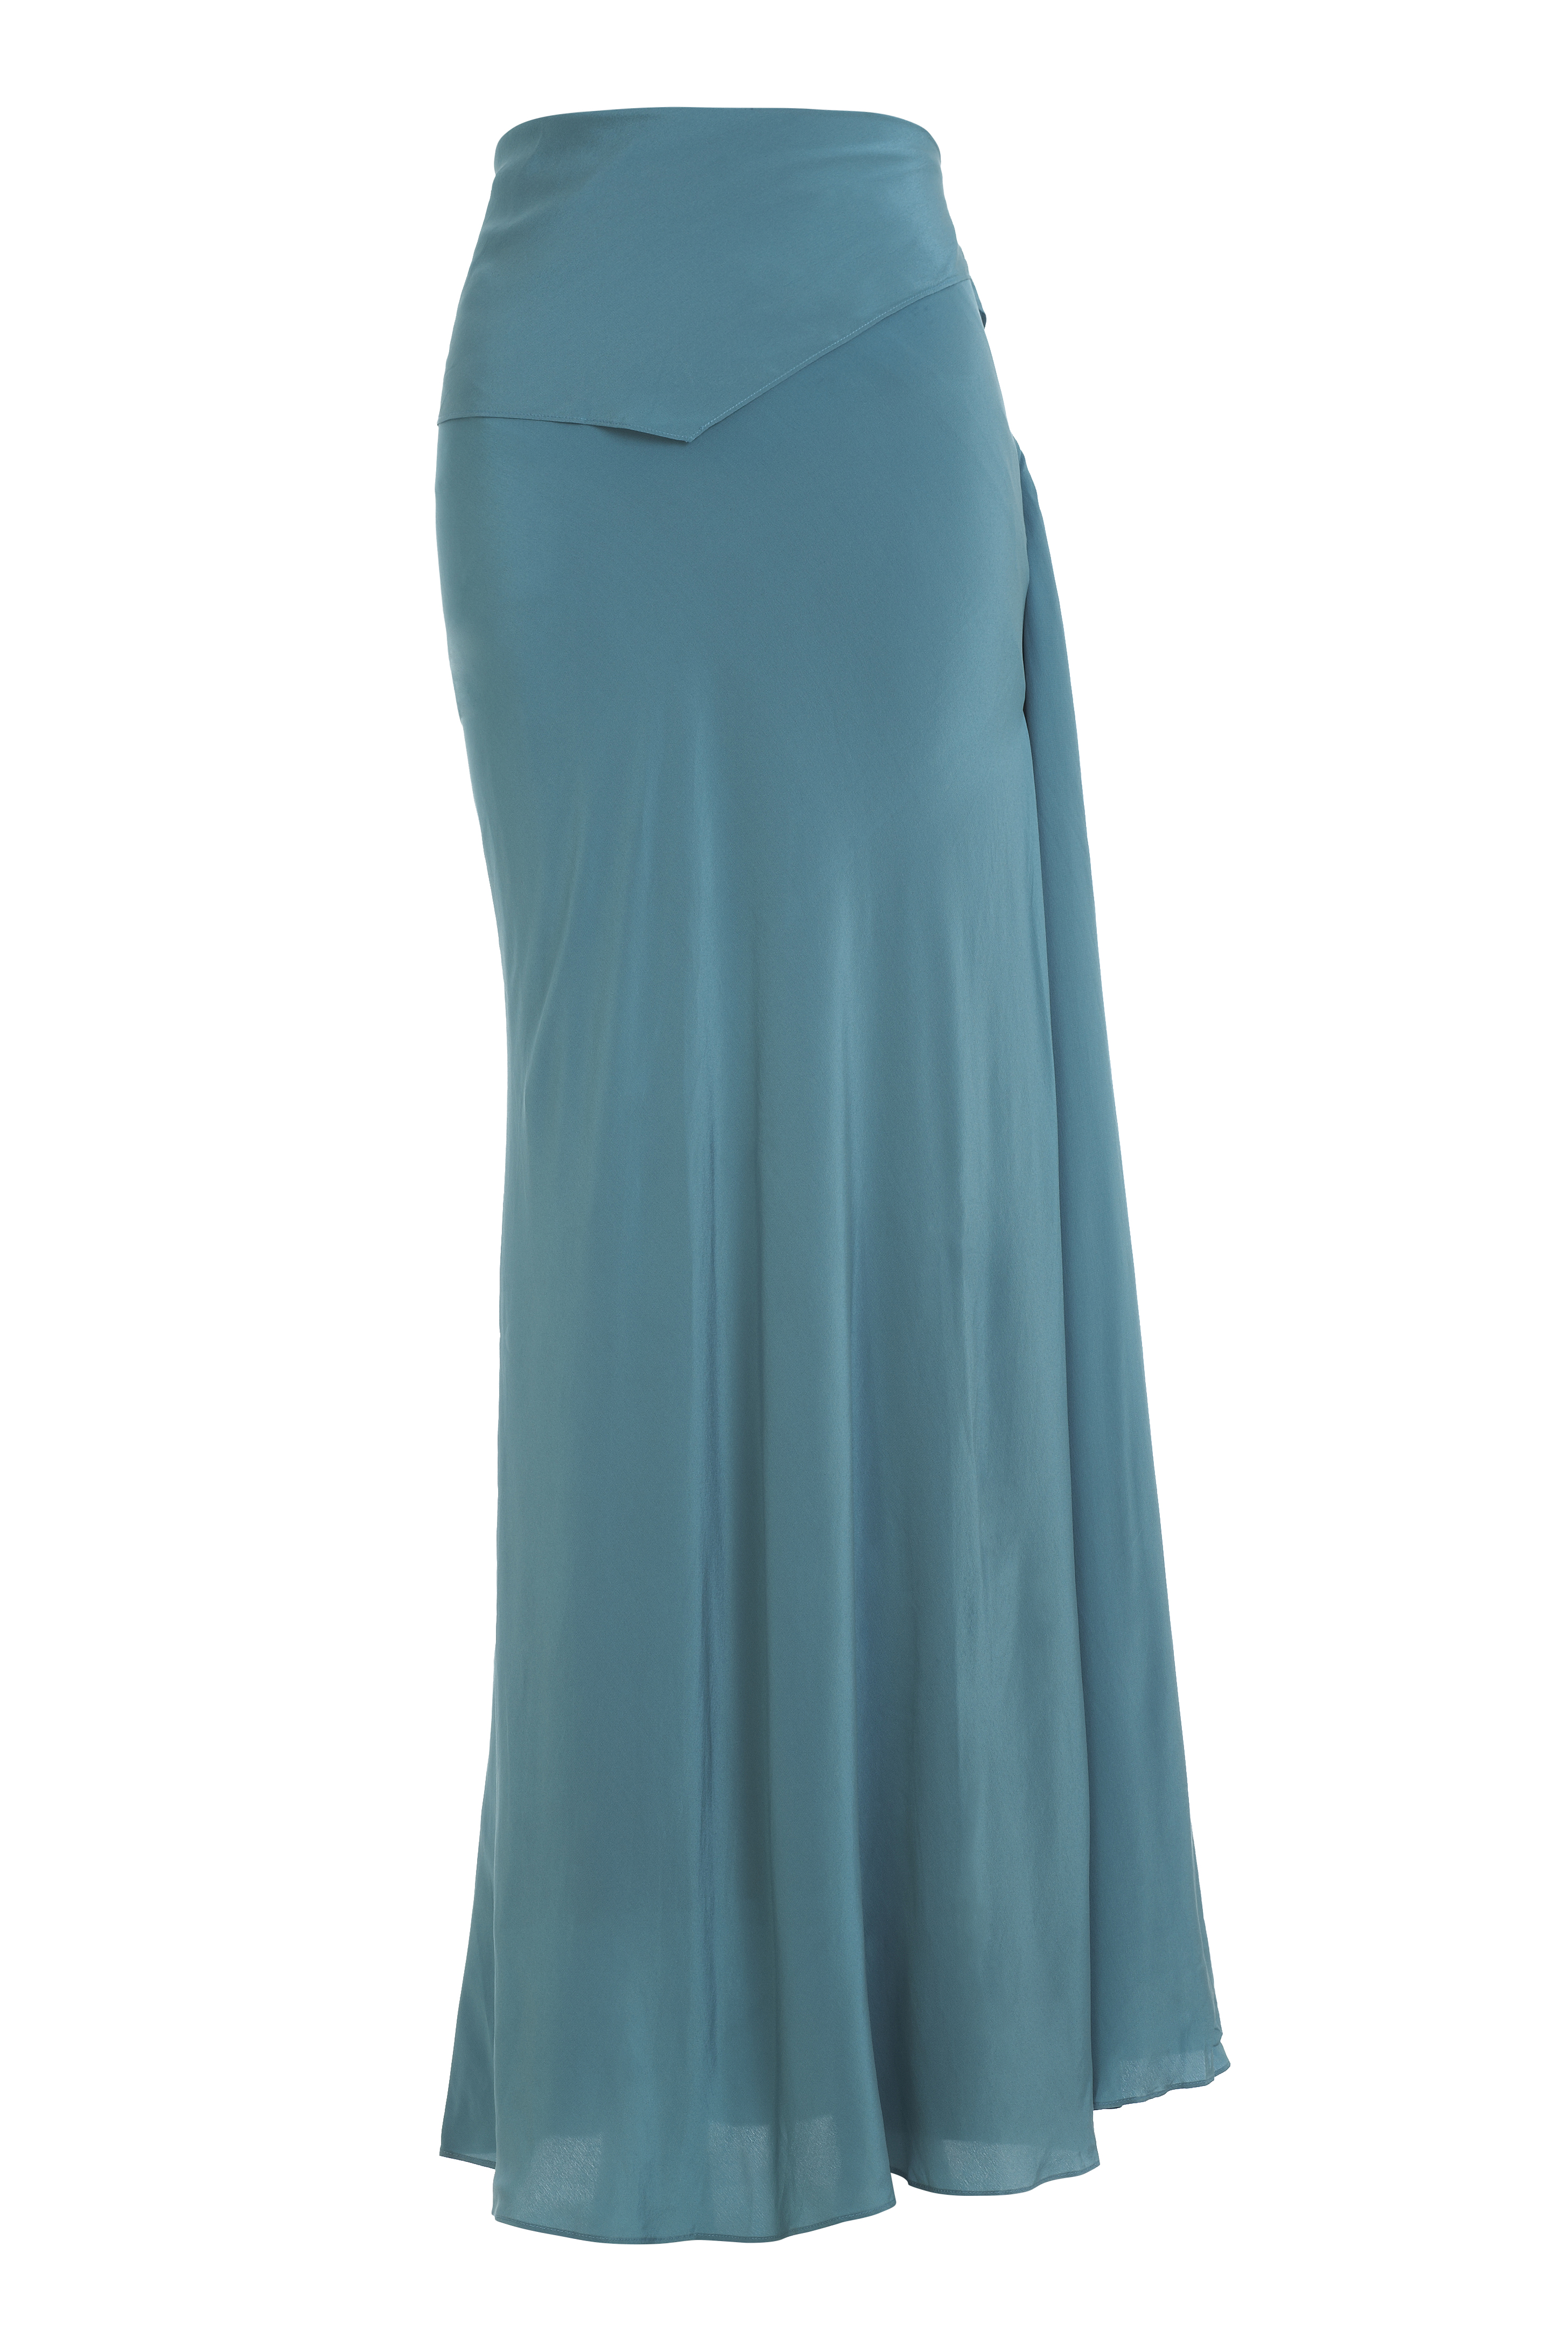 Calvin Klein Collection teal long flowing skirt | Curate8